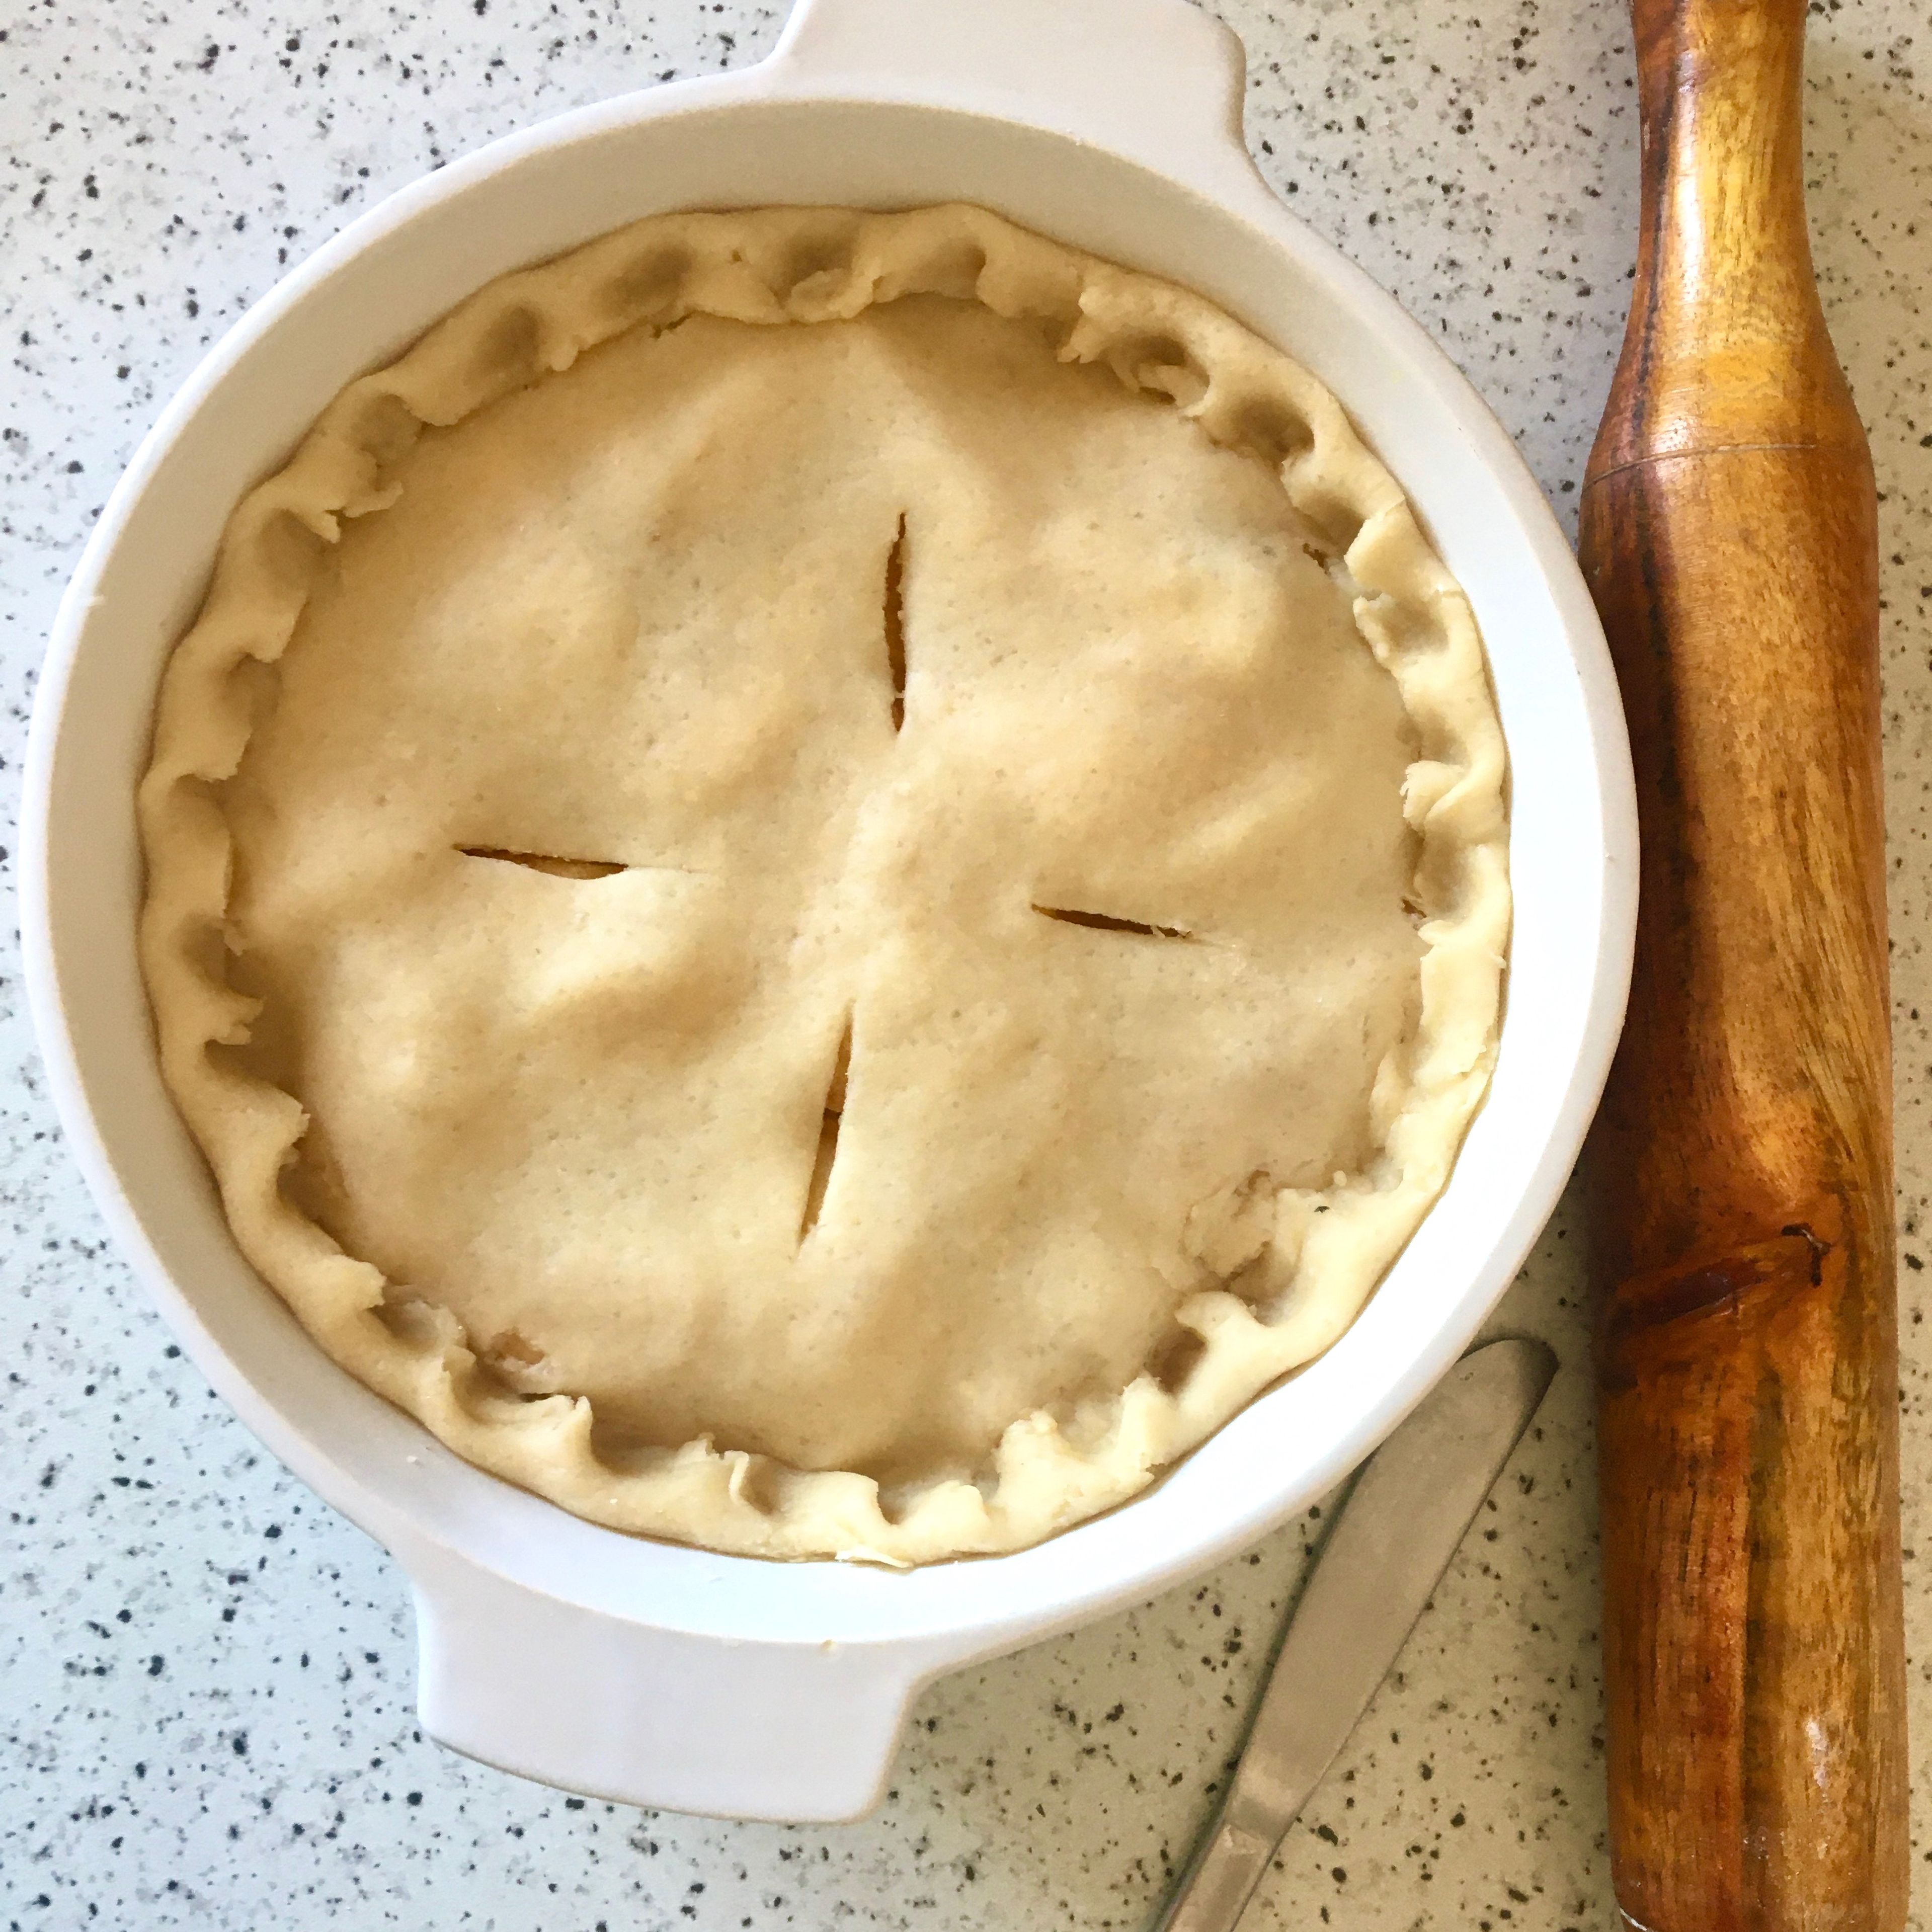 Add the apples onto the pie base, spread evenly. Roll out the remaining dough to a disc, about the size of your pie dish. Adjust it over the pie and seal the edges. Cut some scores over the top to let the steam out. Brush the surface with milk and sprinkle with sugar.